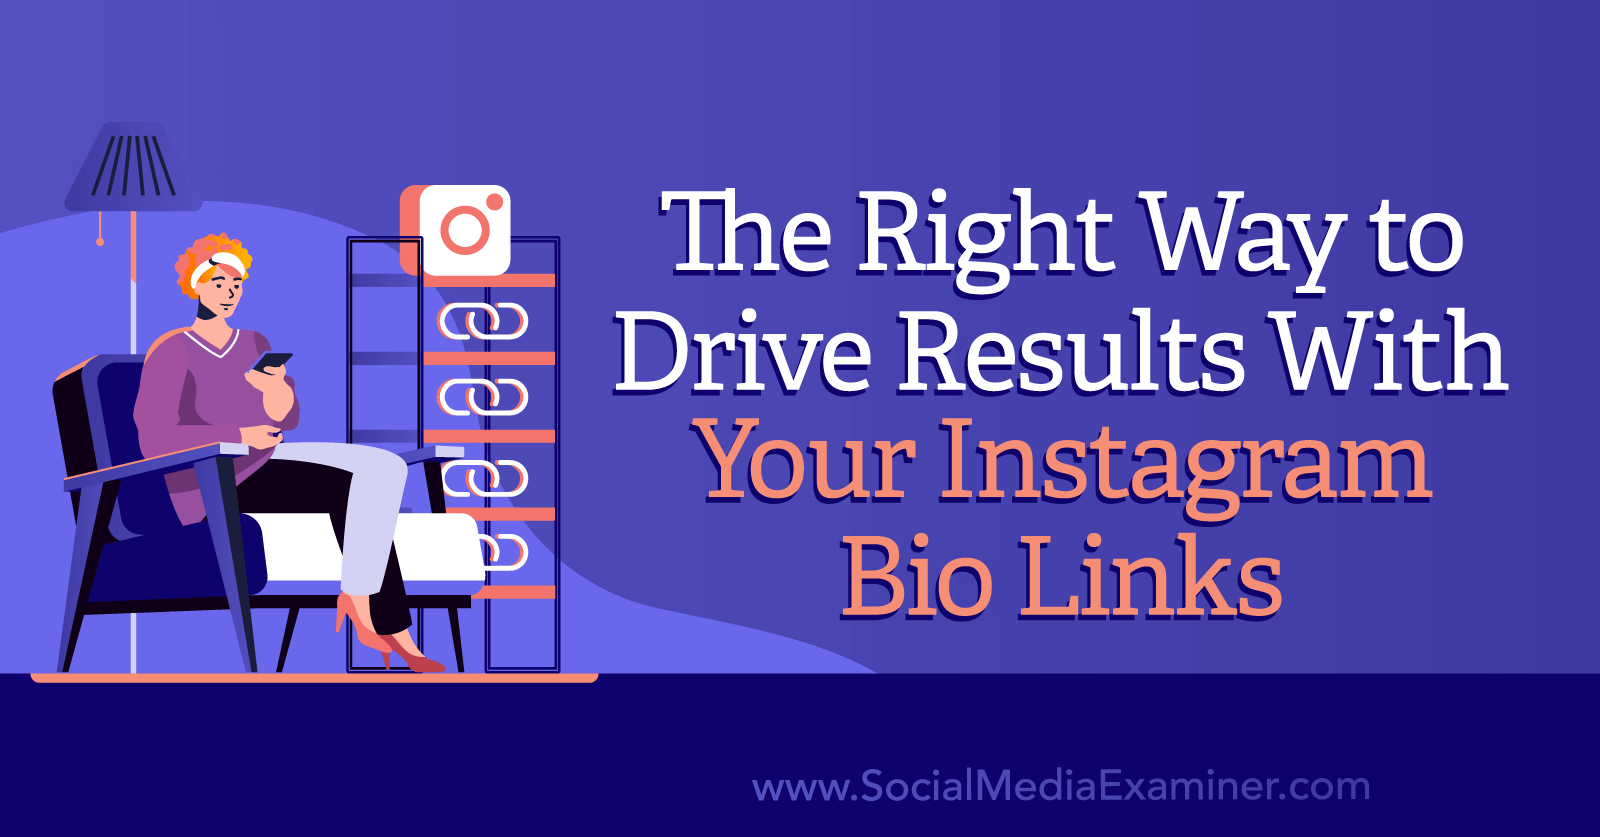 The Right Way to Drive Results With Your Instagram Bio Links by Social Media Examiner